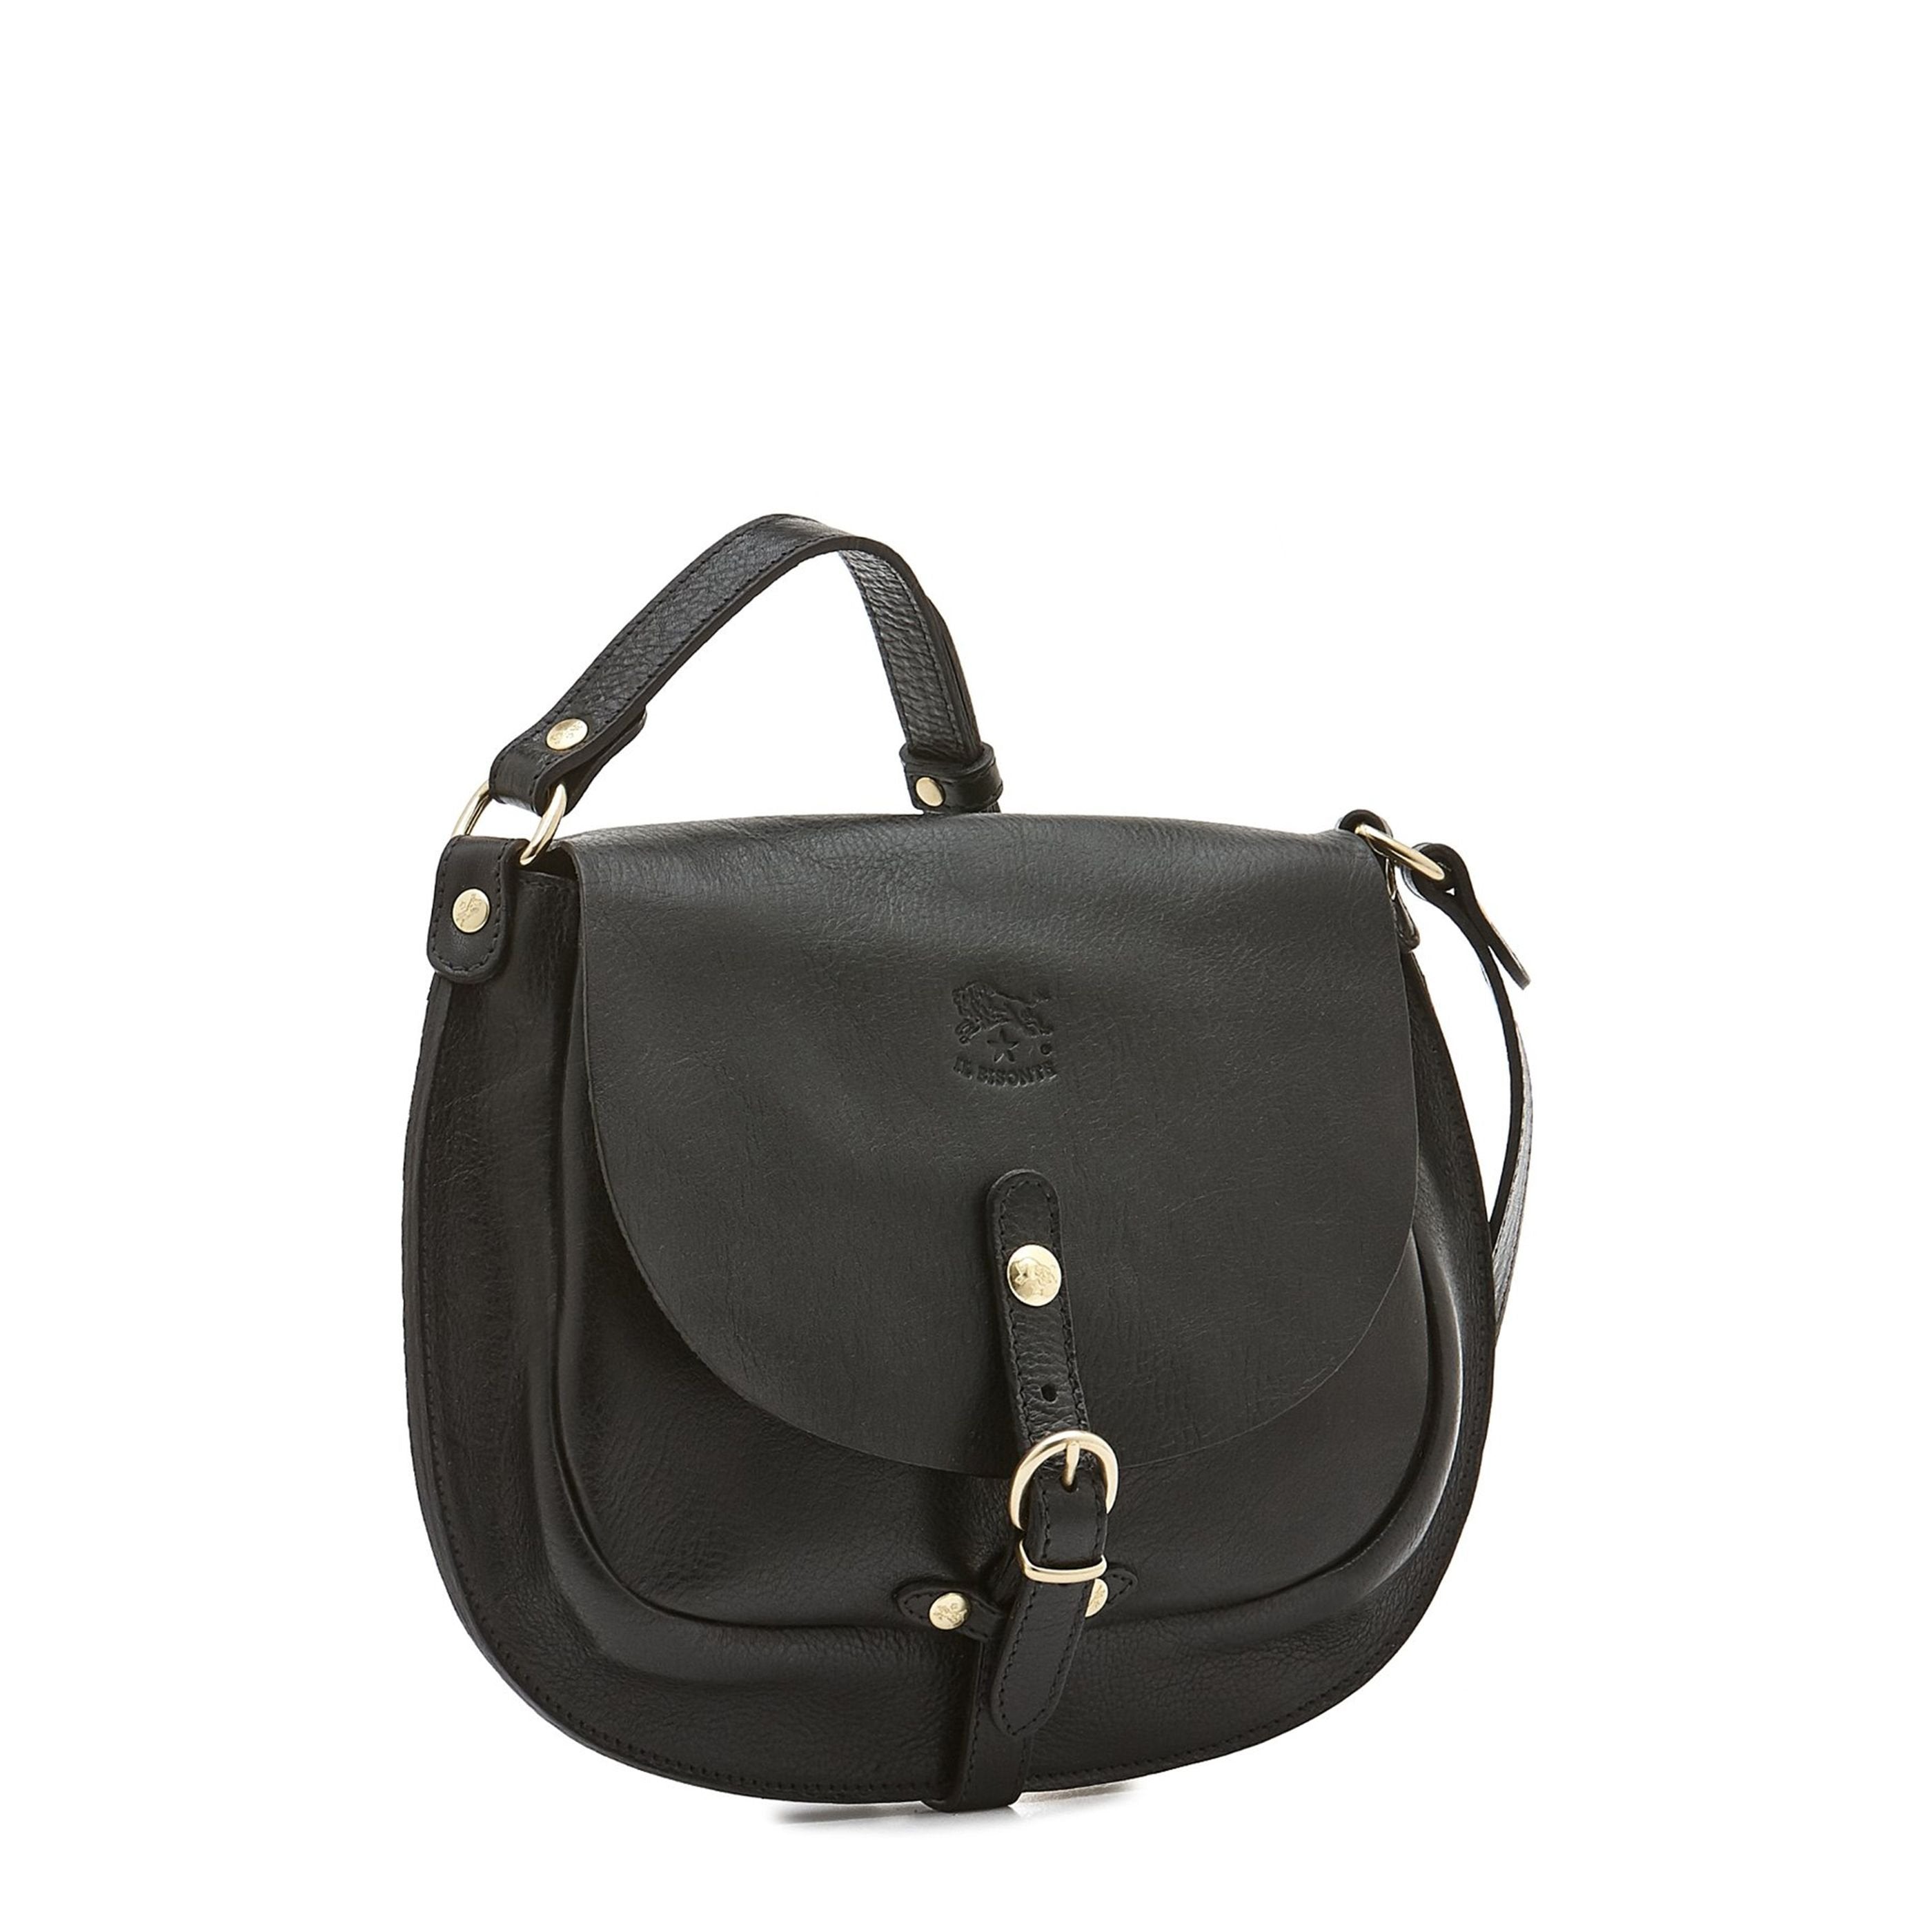 Gaia  | Women's crossbody bag in leather color black